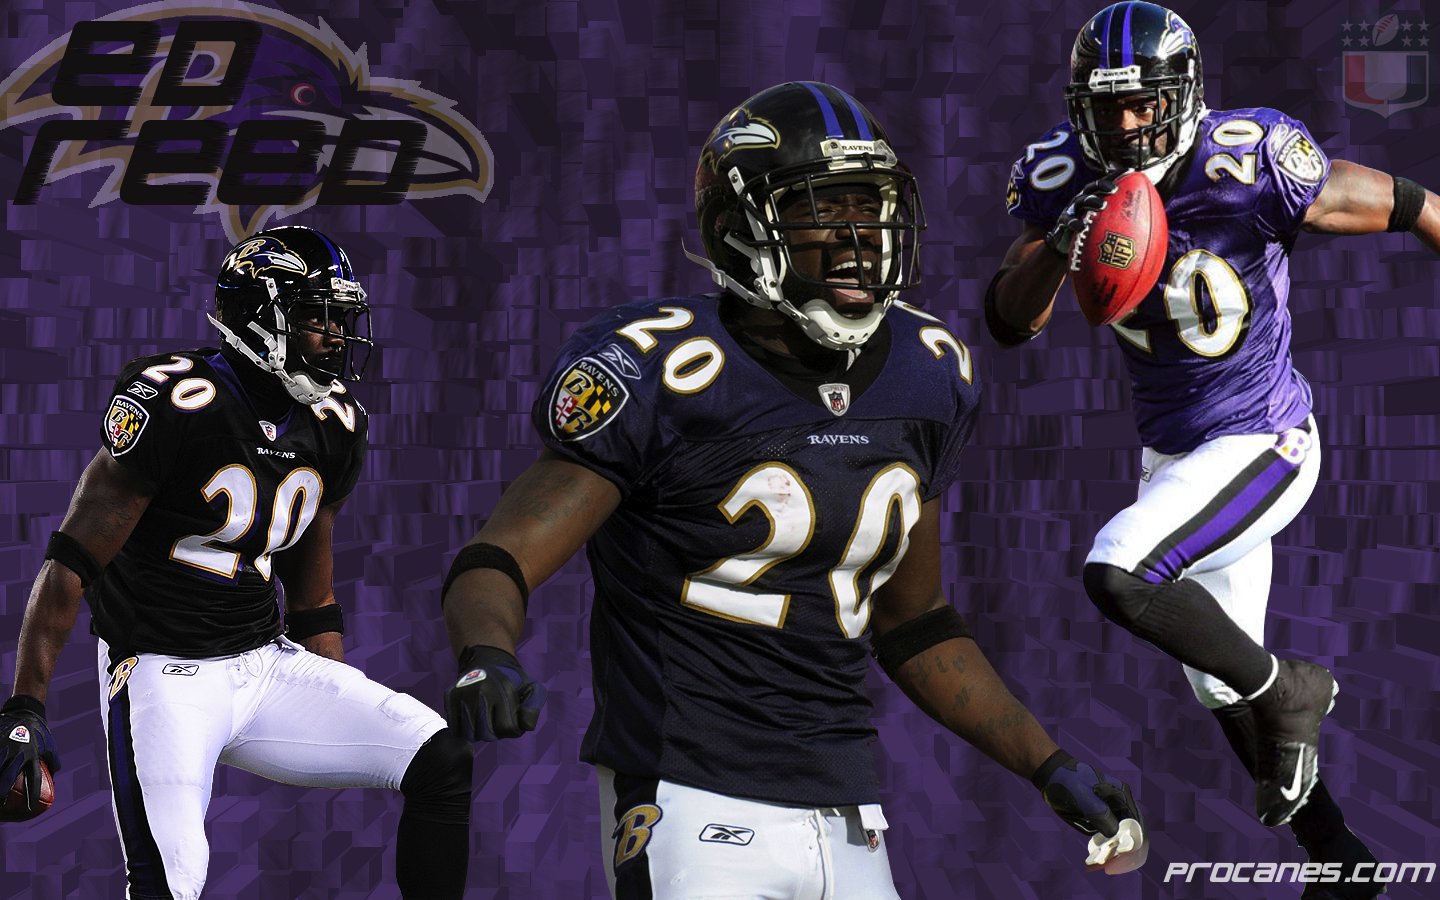 Gallery For gt Ed Reed Hit Wallpaper